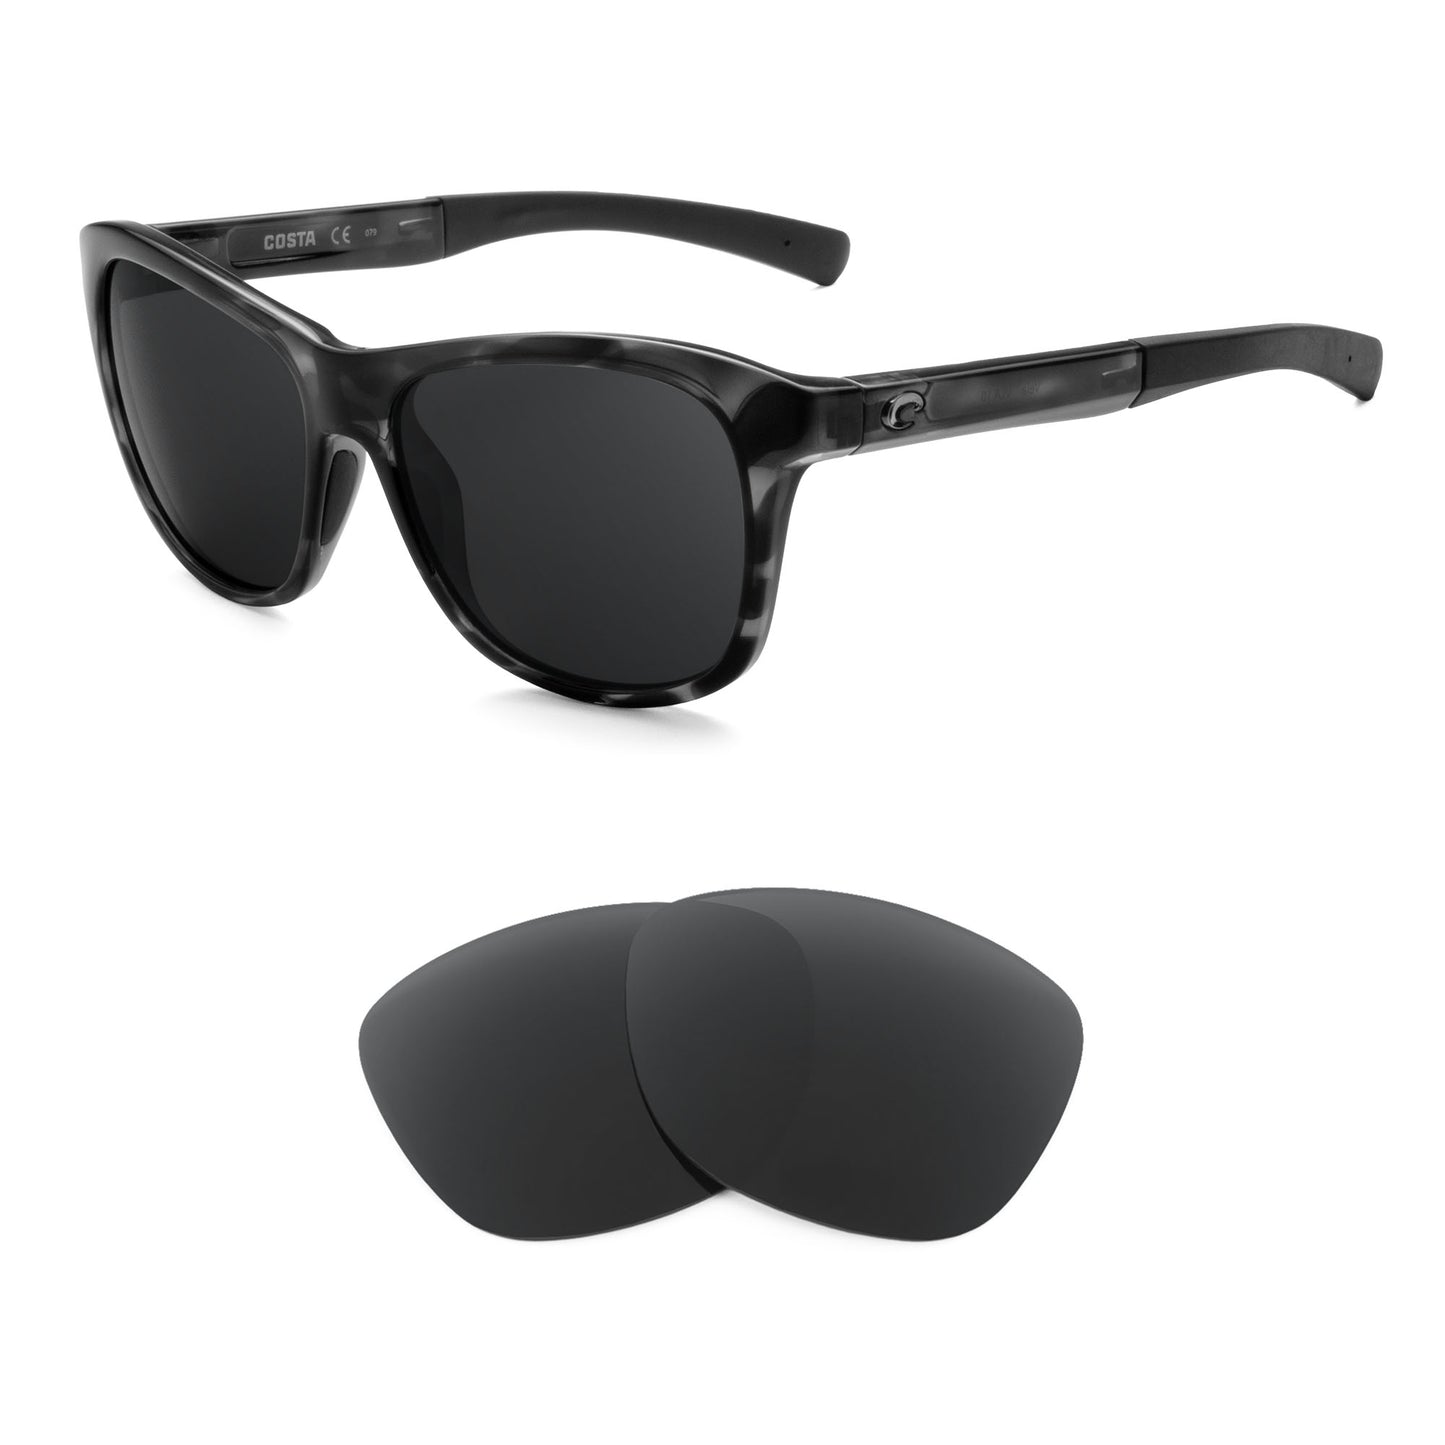 Costa Vela (New) sunglasses with replacement lenses